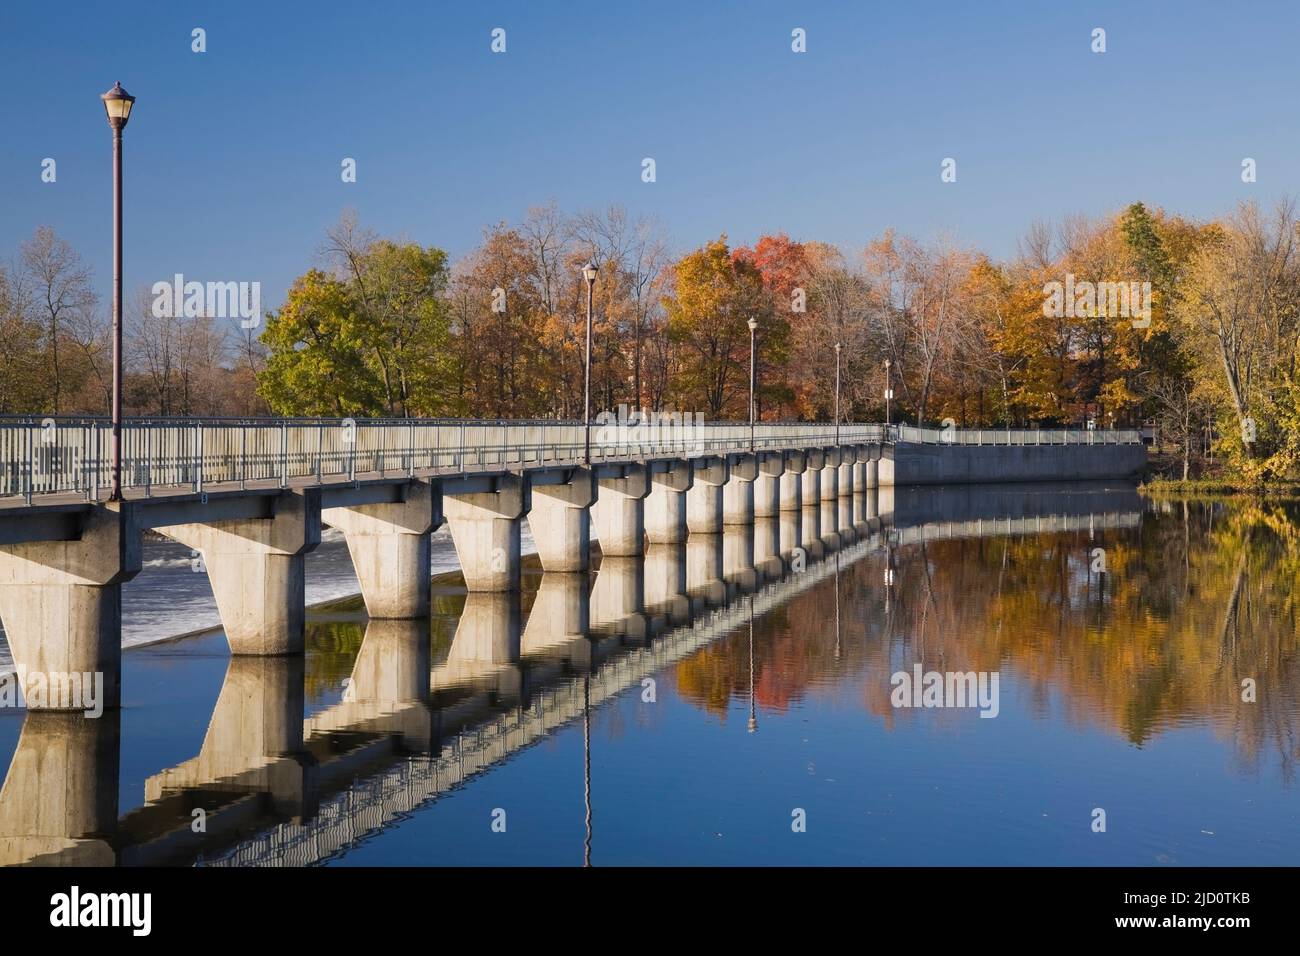 Water flow control dam on Riviere des Mille-Iles in autumn, Old Terrebonne, Lanaudiere, Quebec, Canada. Stock Photo